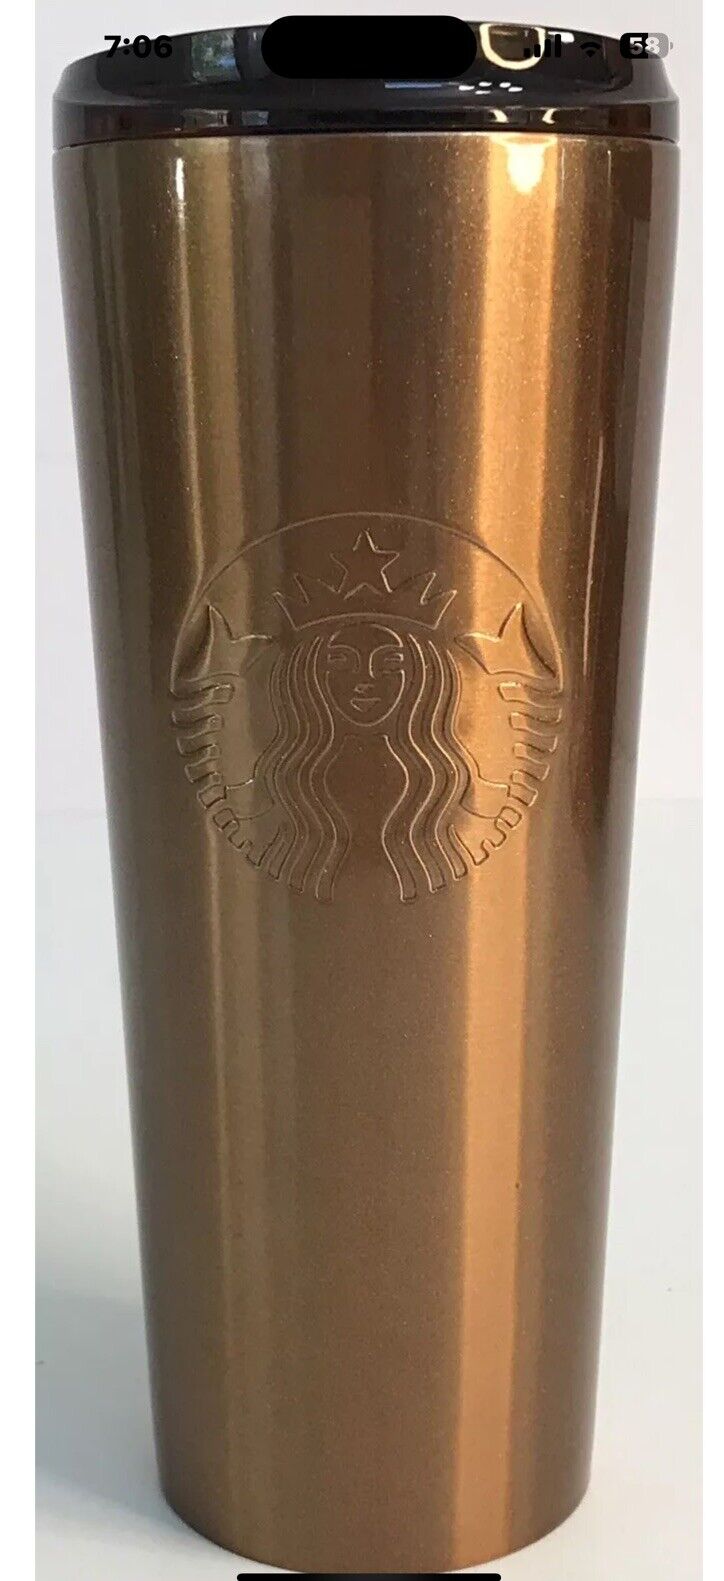 Starbucks 2022 Gold Copper Glitter Stainless Steel Cold Coffee Tumbler 16 Oz NEW